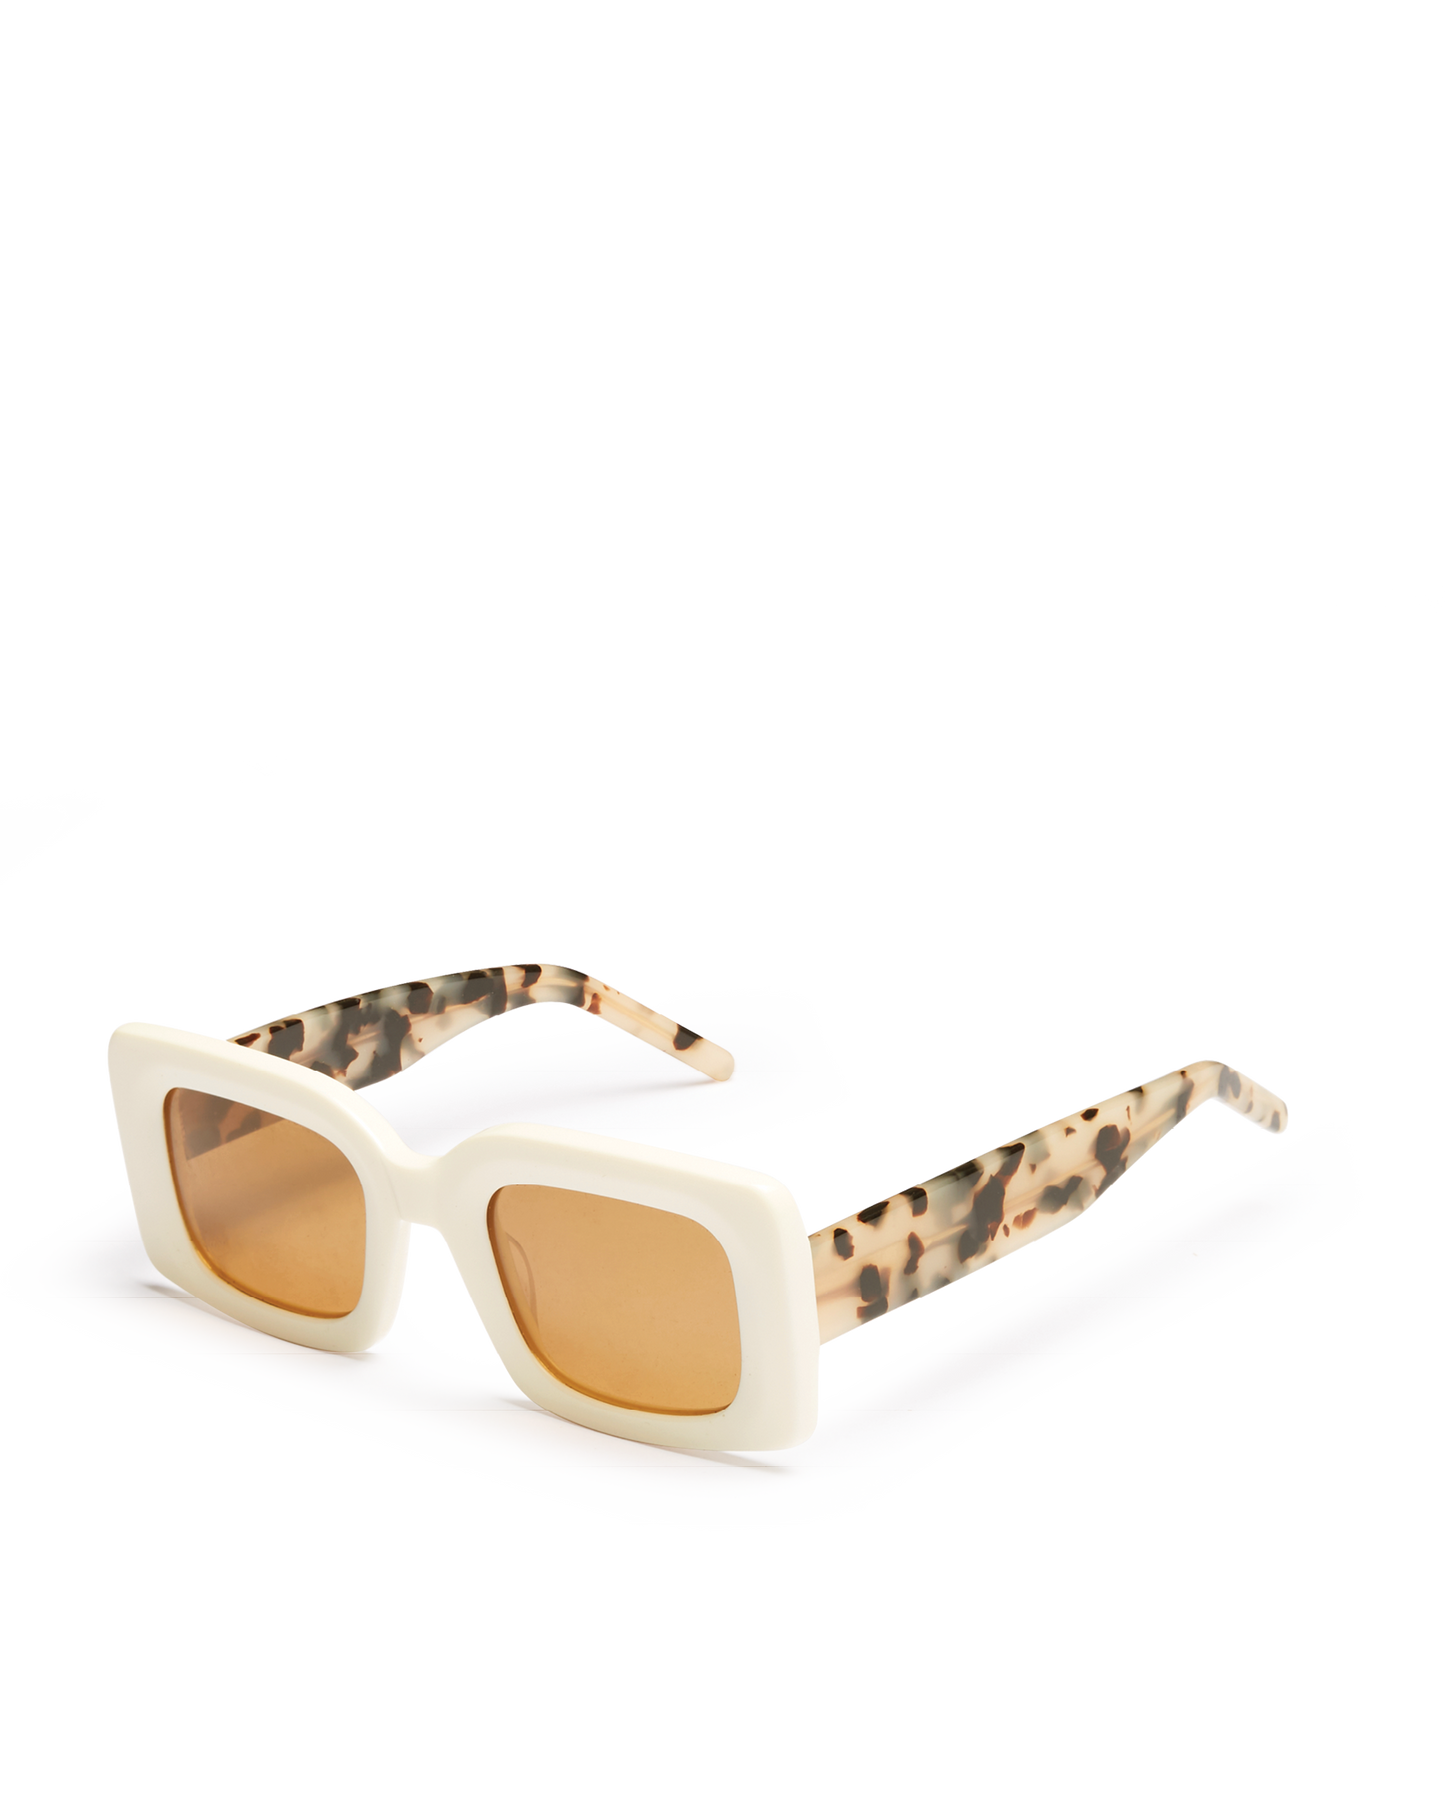 THE KENDALL - IVORY & BLONDE TORT-BROWN-SUNGLASSES-BANBE-O/S-Billini